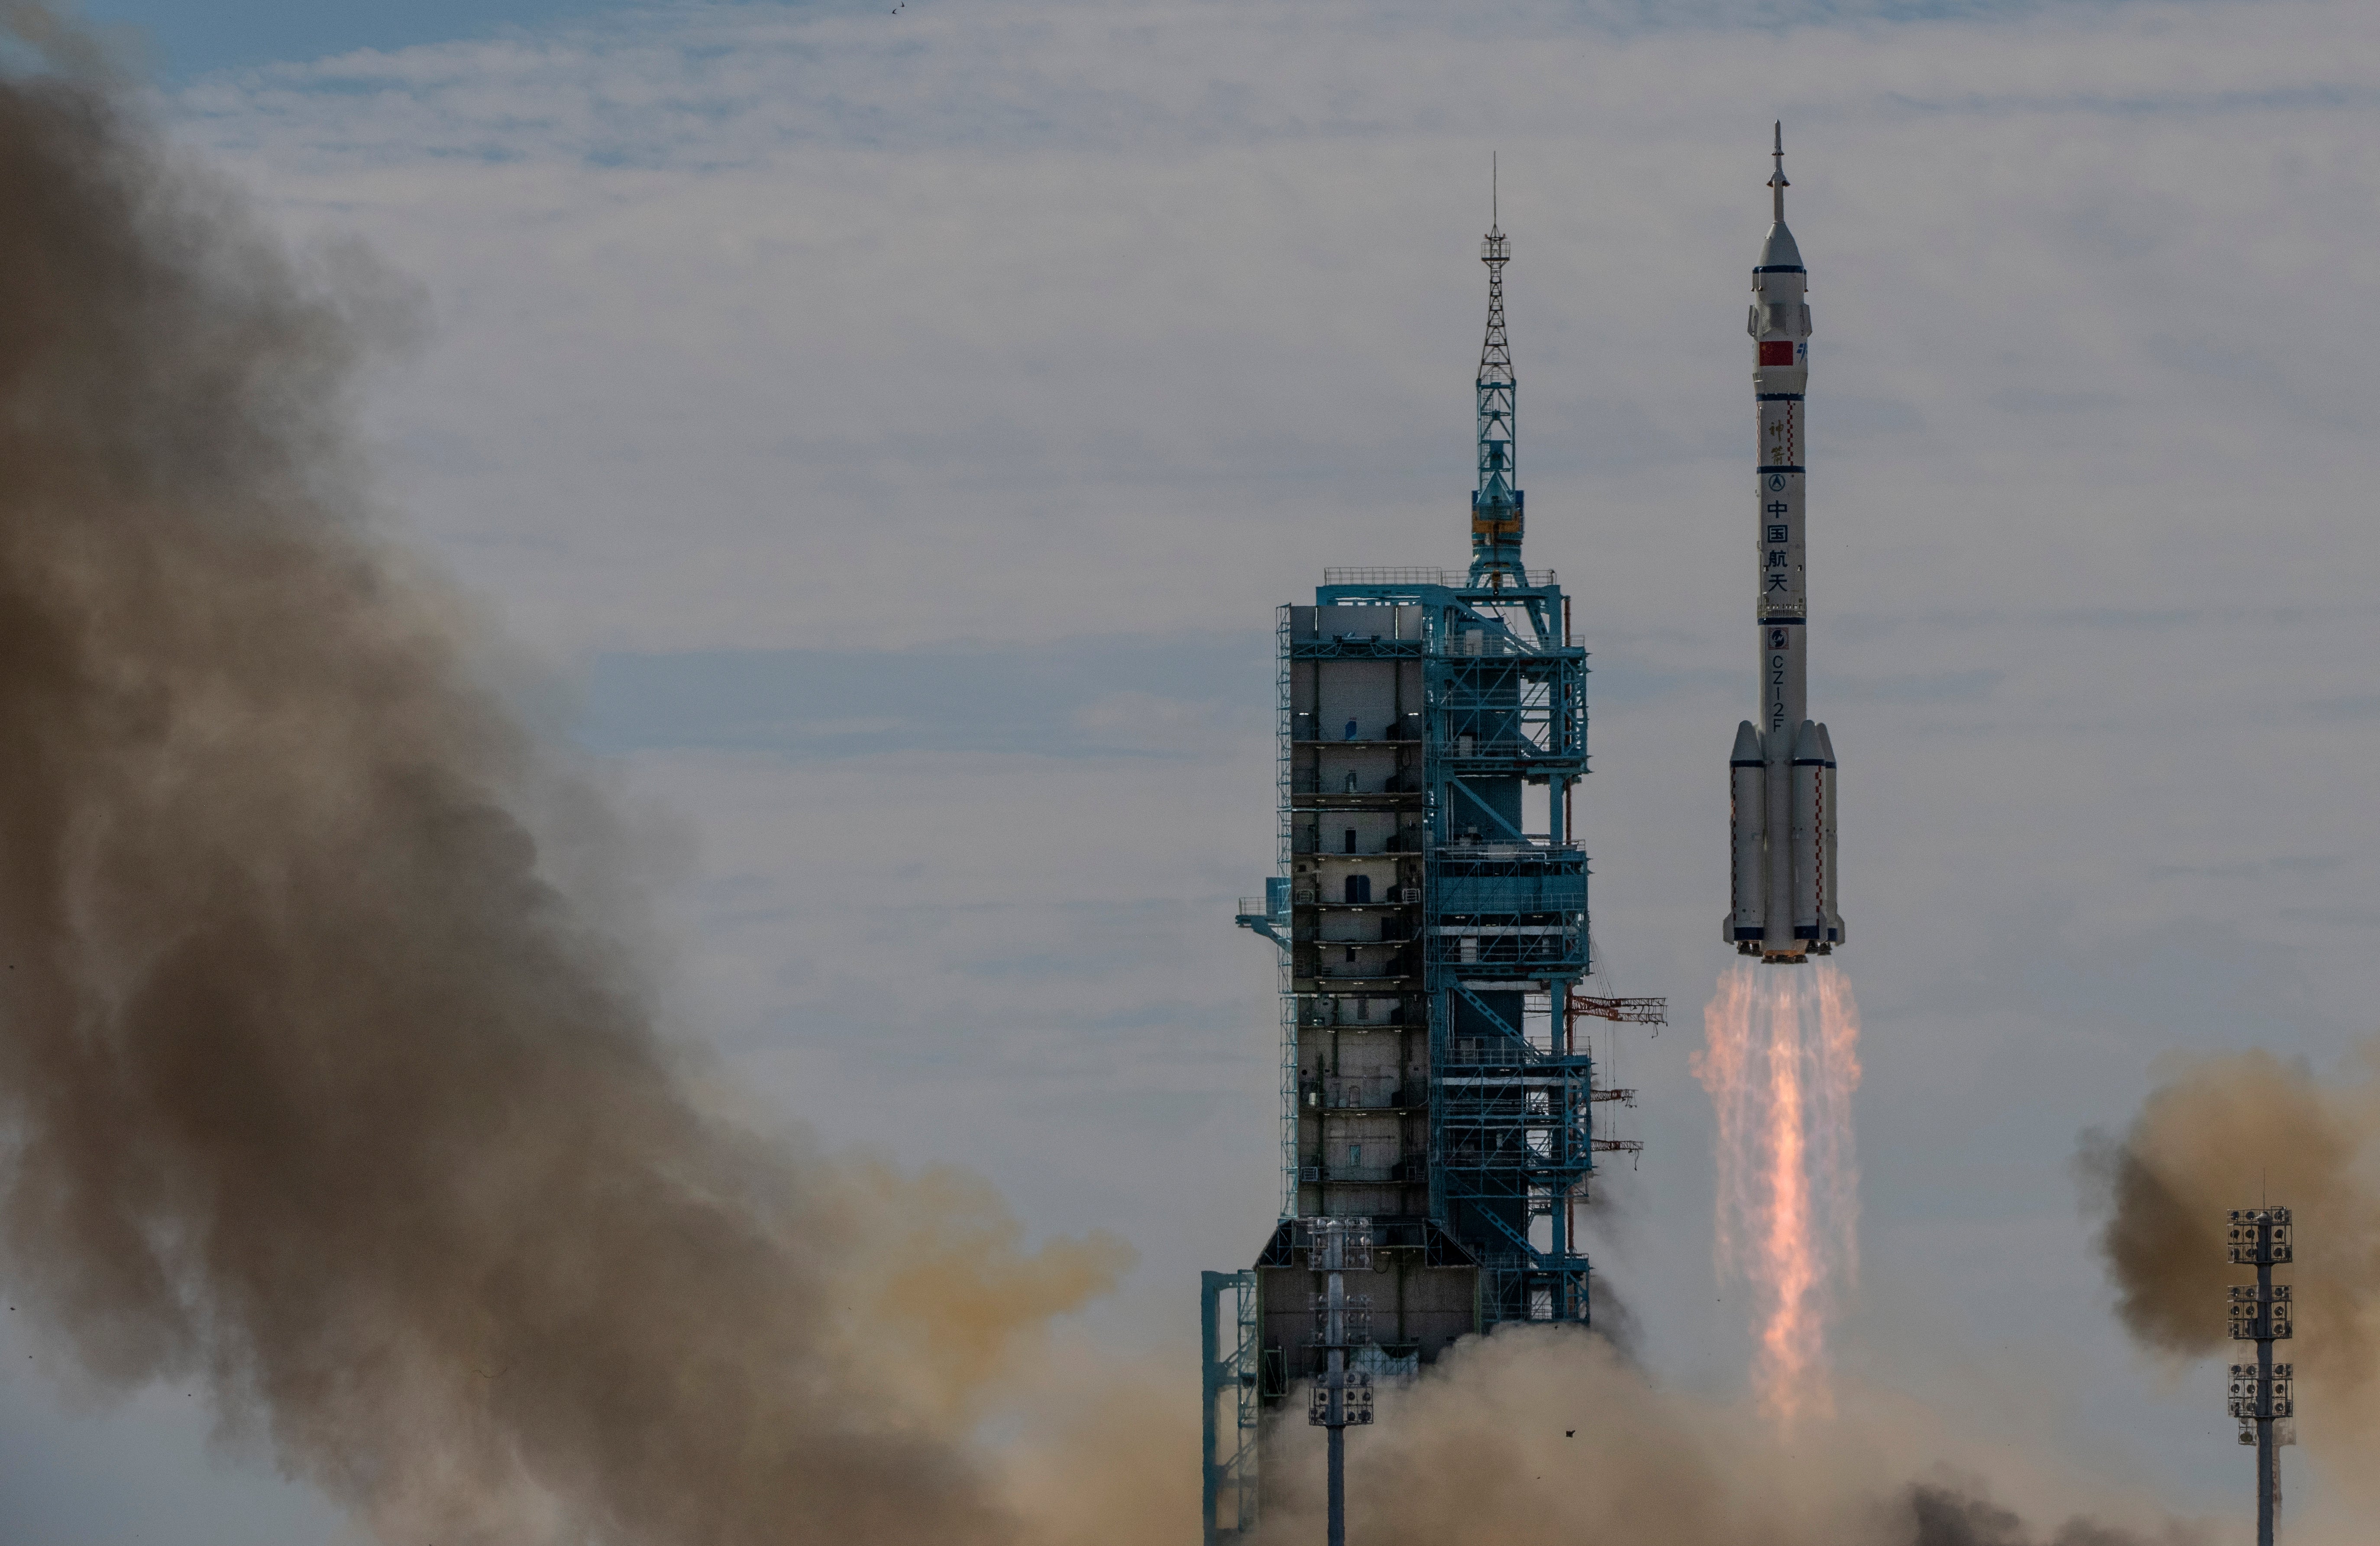 The manned Shenzhou-12 spacecraft from China's Manned Space Agency onboard the Long March-2F rocket launches with three Chinese astronauts onboard at the Jiuquan Satellite Launch Centre